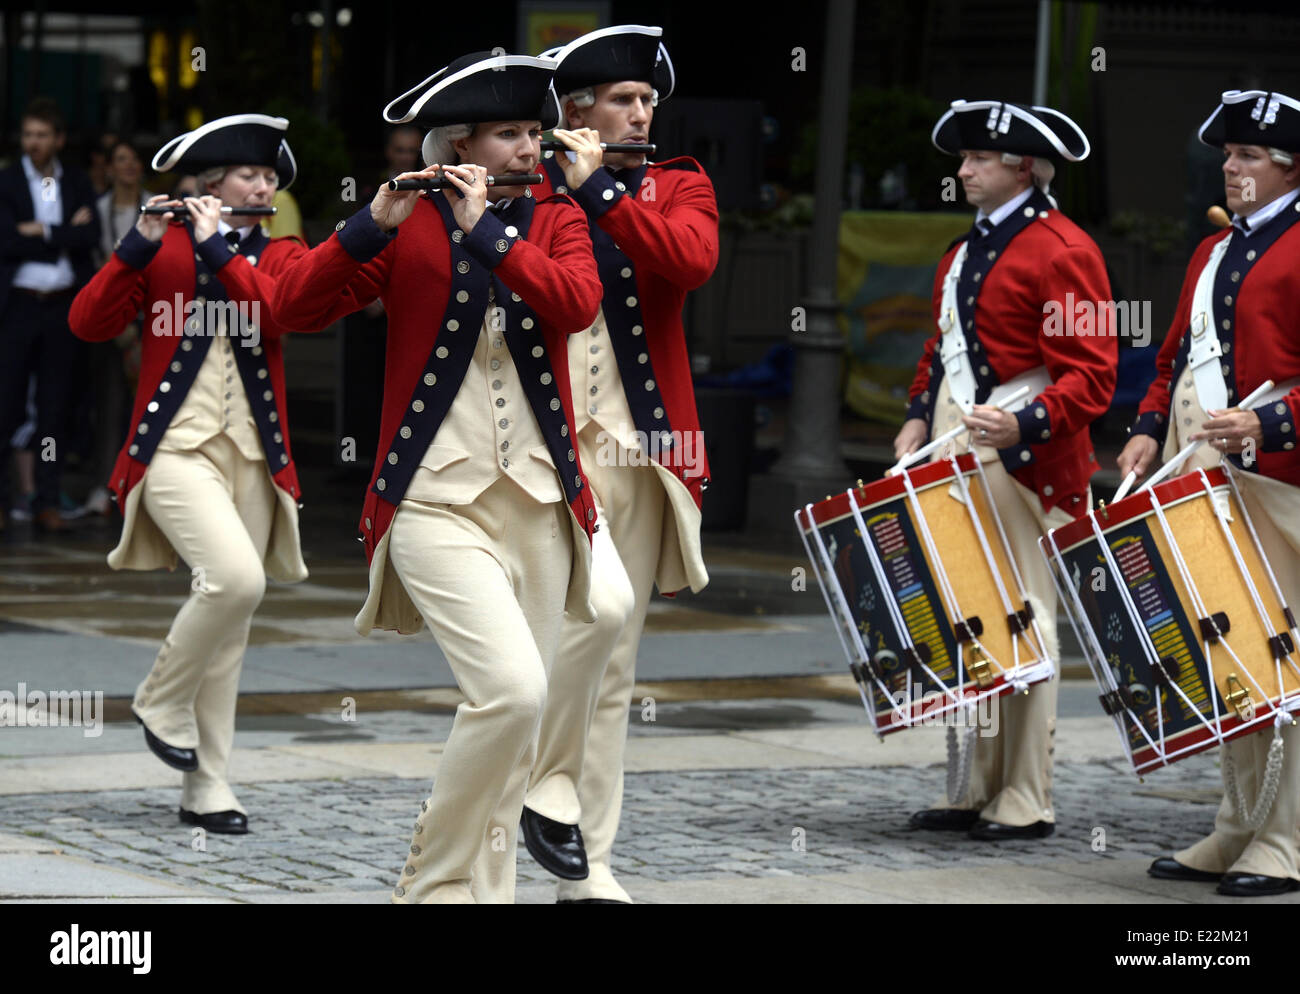 New York, June 13. 14th June, 1775. U.S. Army Old Guard Fife and Drum Corps members attend United States Army 239th Birthday Celebration in New York, the United States, on June 13, 2014. The United States Army was founded on June 14, 1775. Credit:  Wang Lei/Xinhua/Alamy Live News Stock Photo